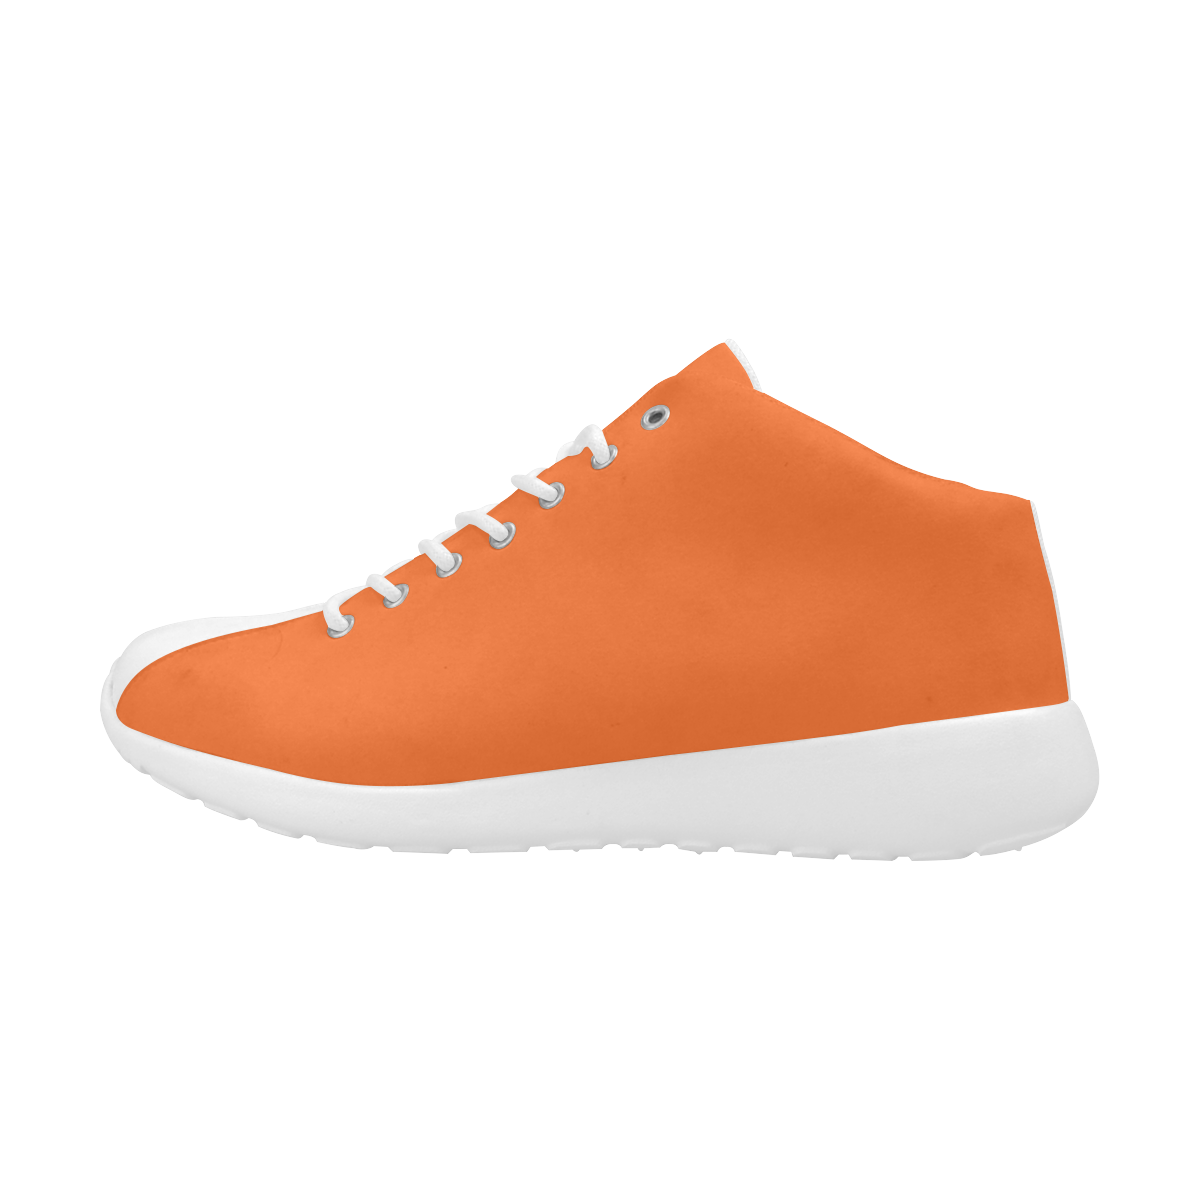 Outrageous Orange Solid Colored Men's Basketball Training Shoes (Model 47502)